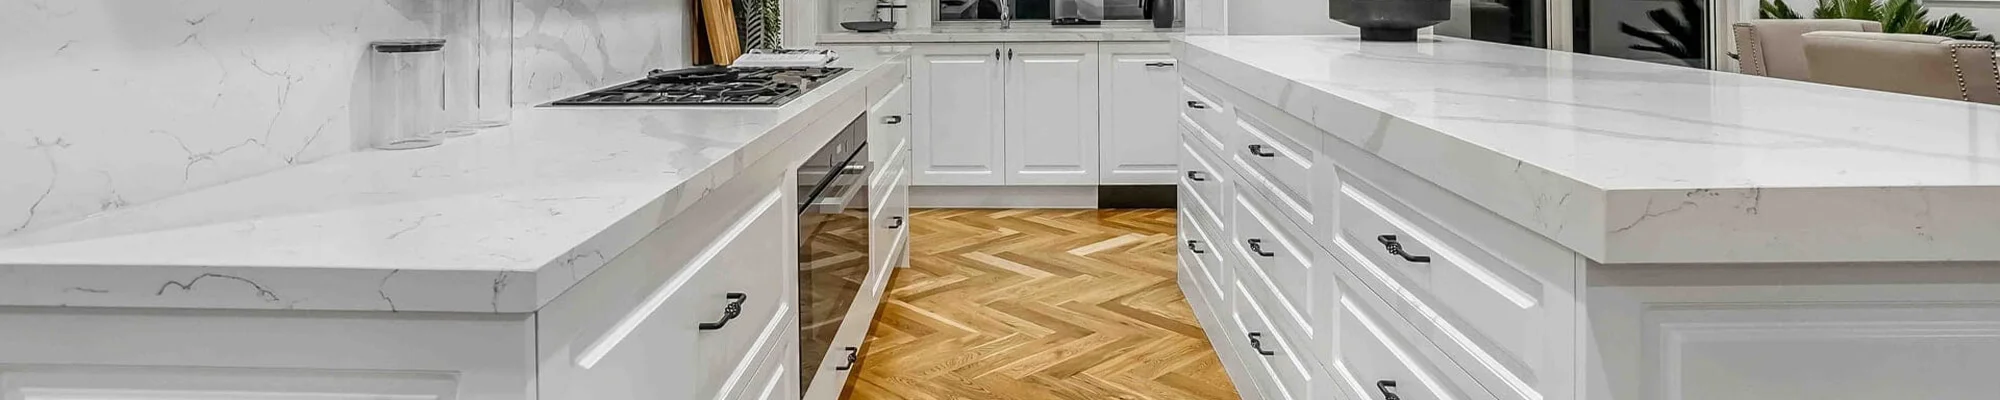 Hardwood flooring in kitchen with white countertops provided by Troy Flooring Center in Troy, MO